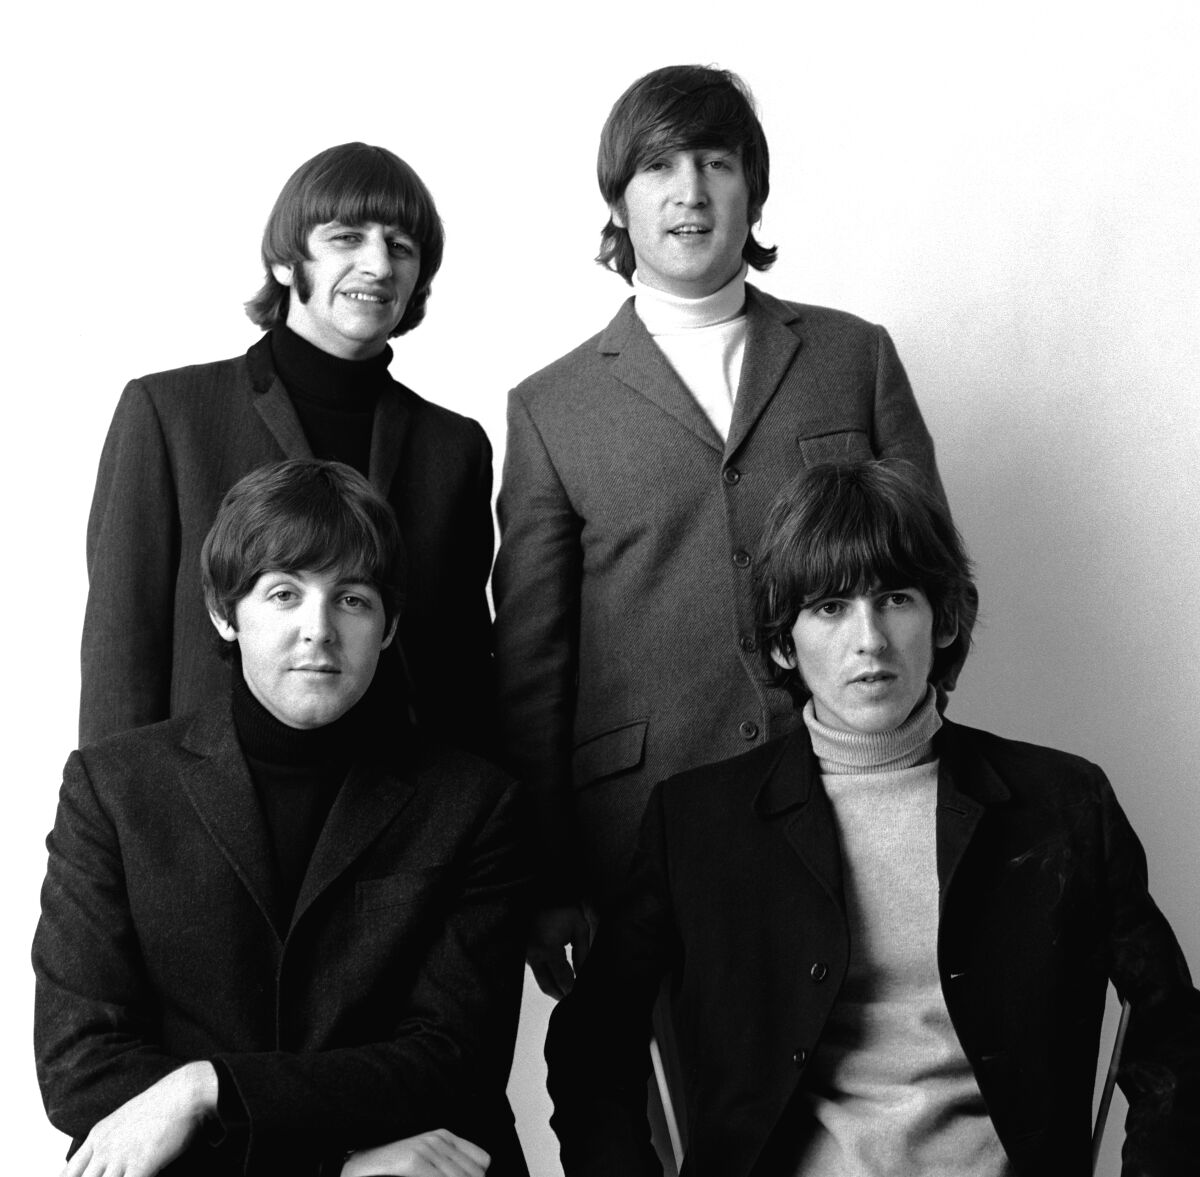 A rock band in the 1960s posed in a black-and-white photo